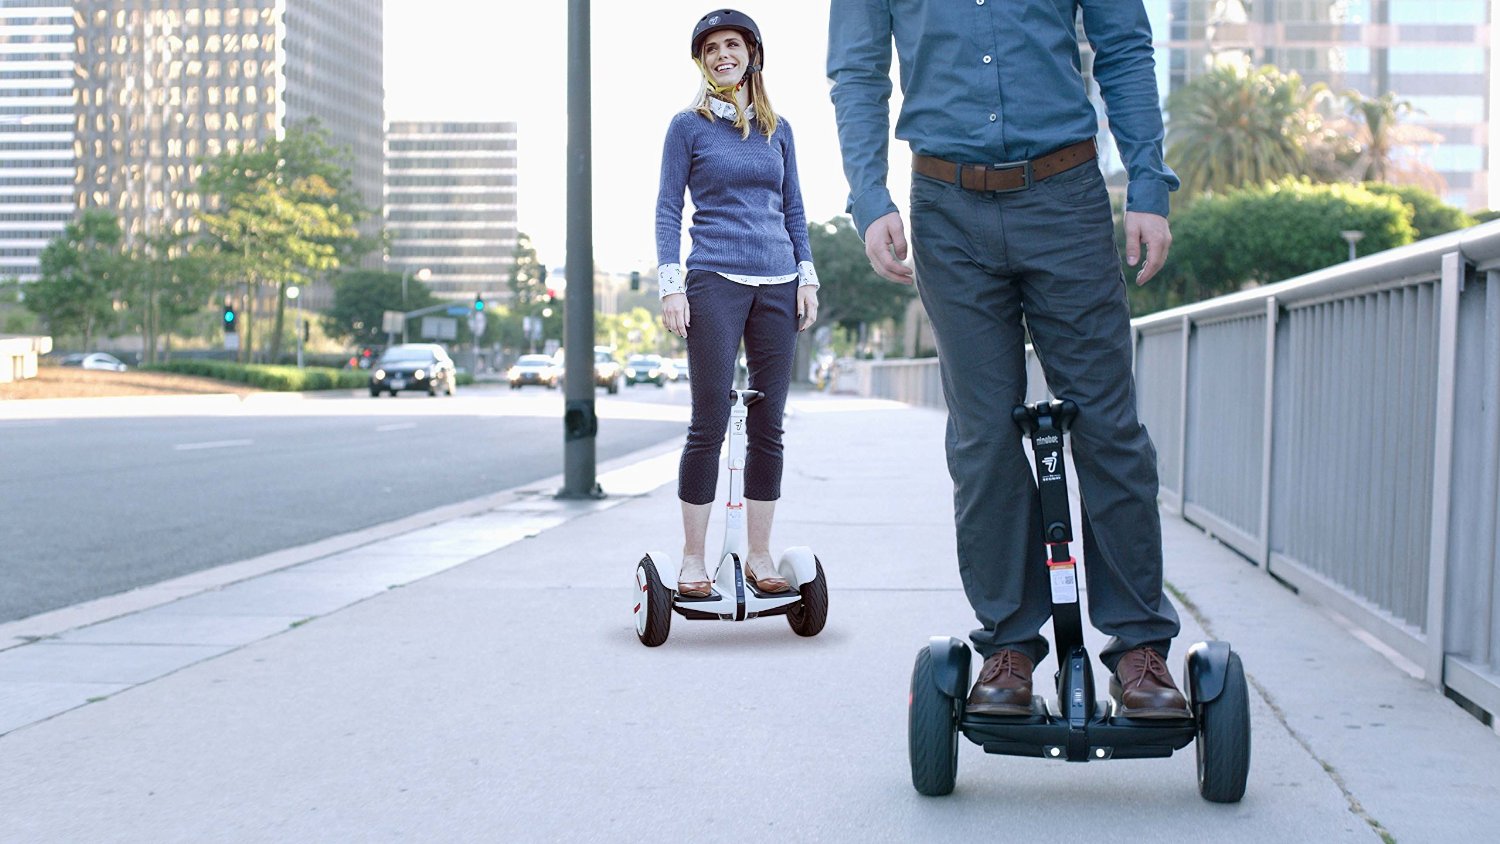 Segway's miniPRO Self-Balancing Personal Transporter is one of the coolest  gifts this year: $599 shipped (Reg. $800)